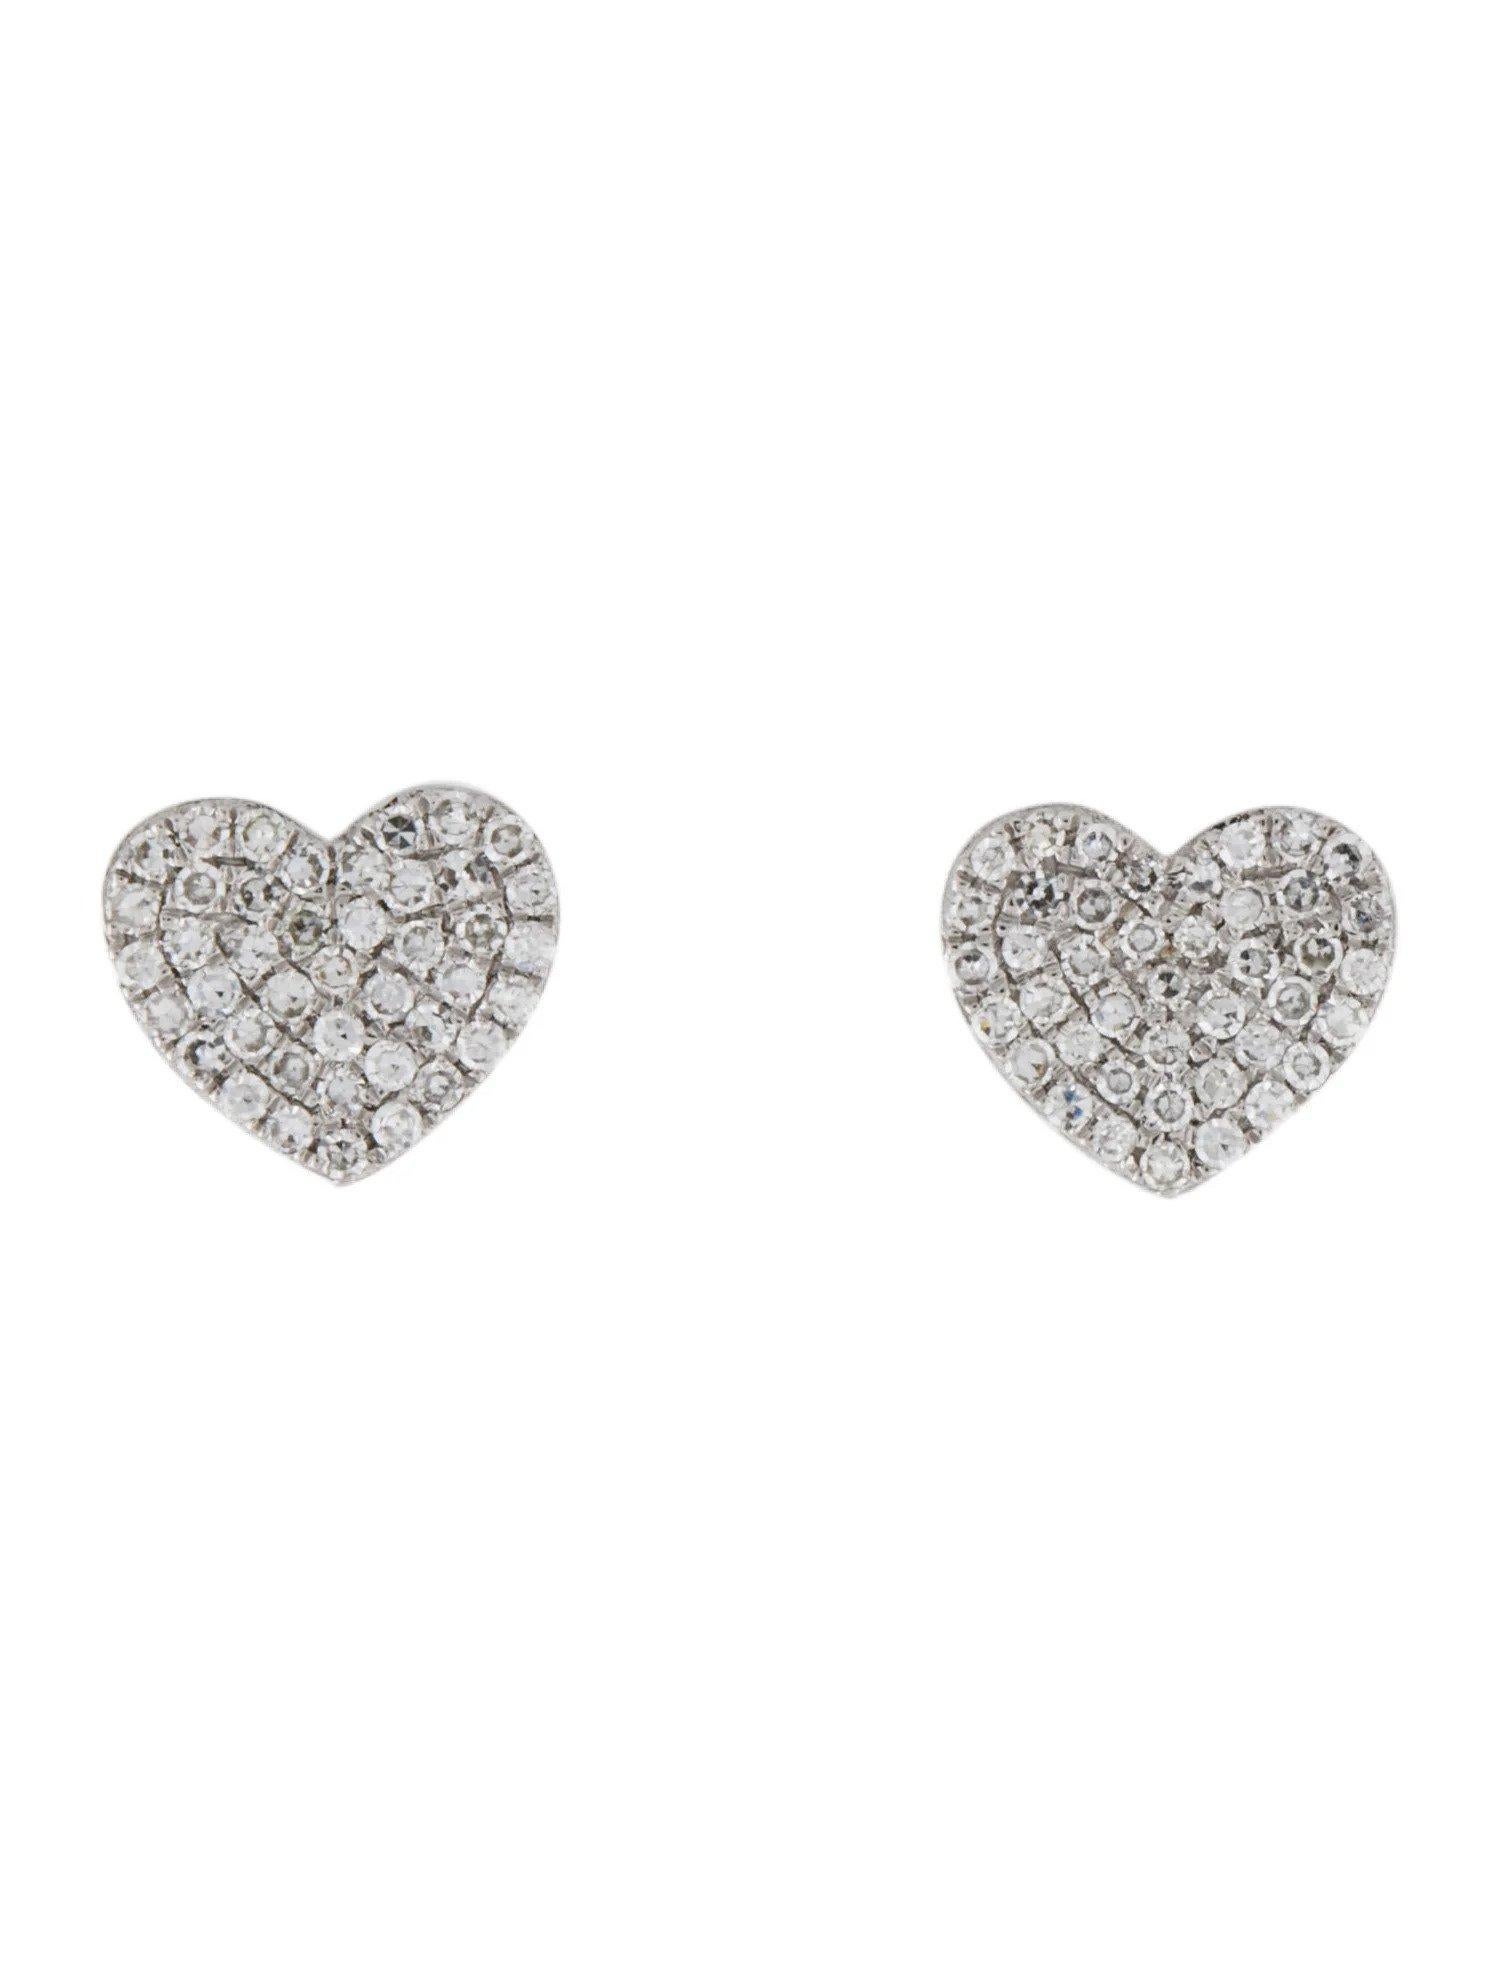 These Diamond earrings are a stunning and timeless accessory that can add a touch of glamour and sophistication to any outfit. These beautiful pieces of jewelry feature dazzling diamonds that sparkle and catch the light, making them the perfect